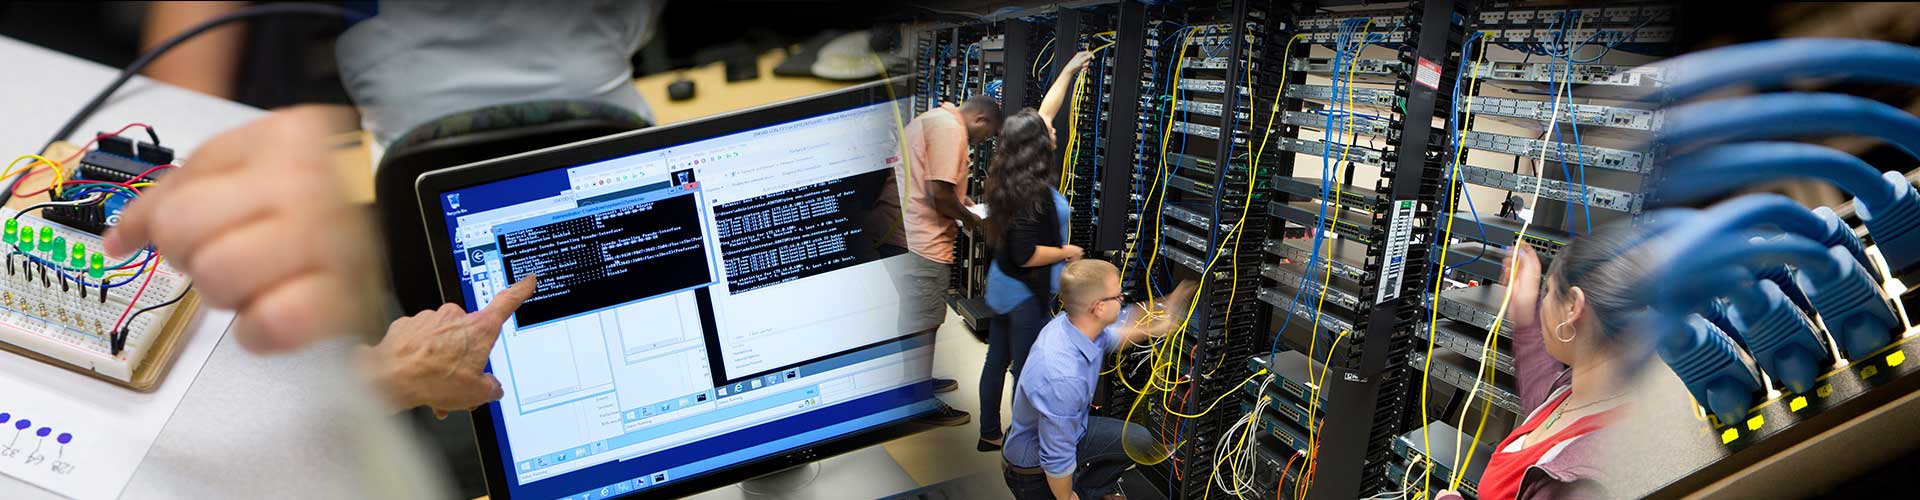 A collage image including circuit boards, command-line windows, people working on server racks and a bundle of network cable.